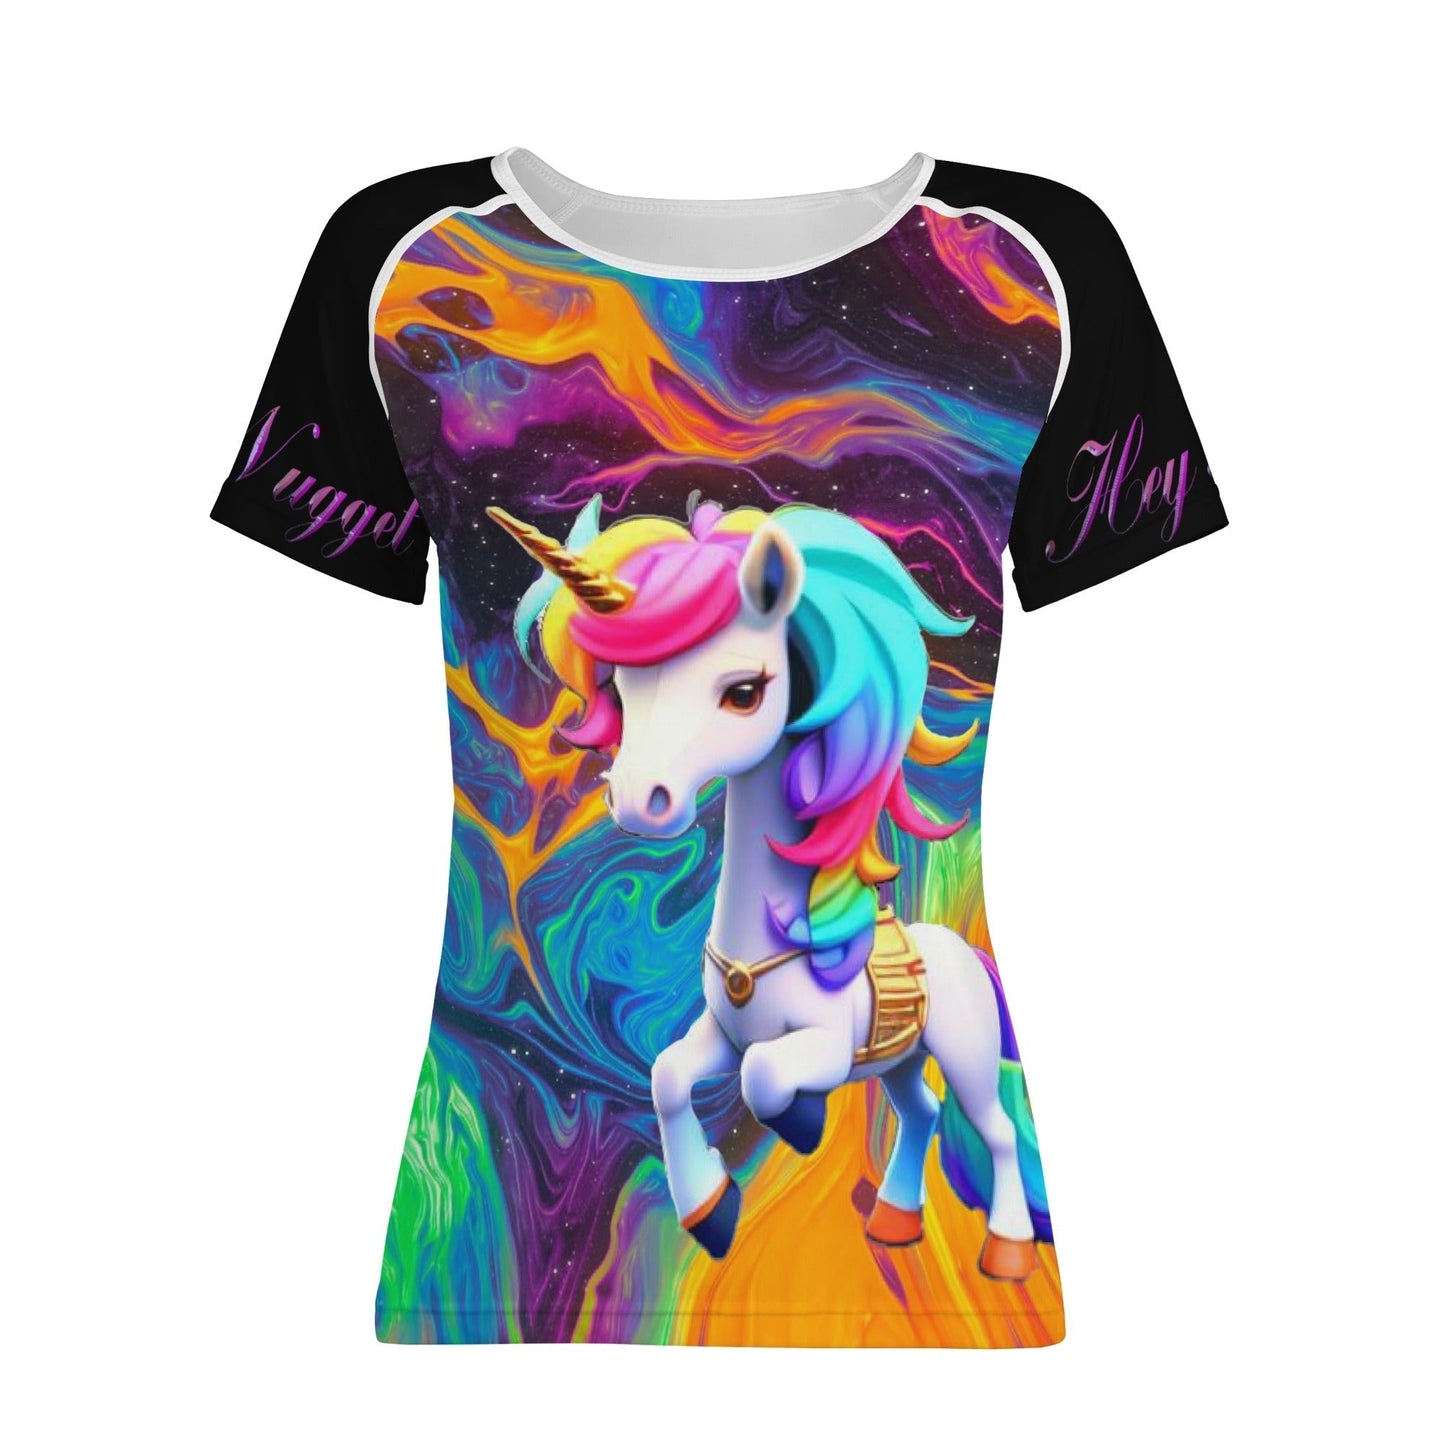 Stand out  with the  Unicorn Womens  T shirt  available at Hey Nugget. Grab yours today!